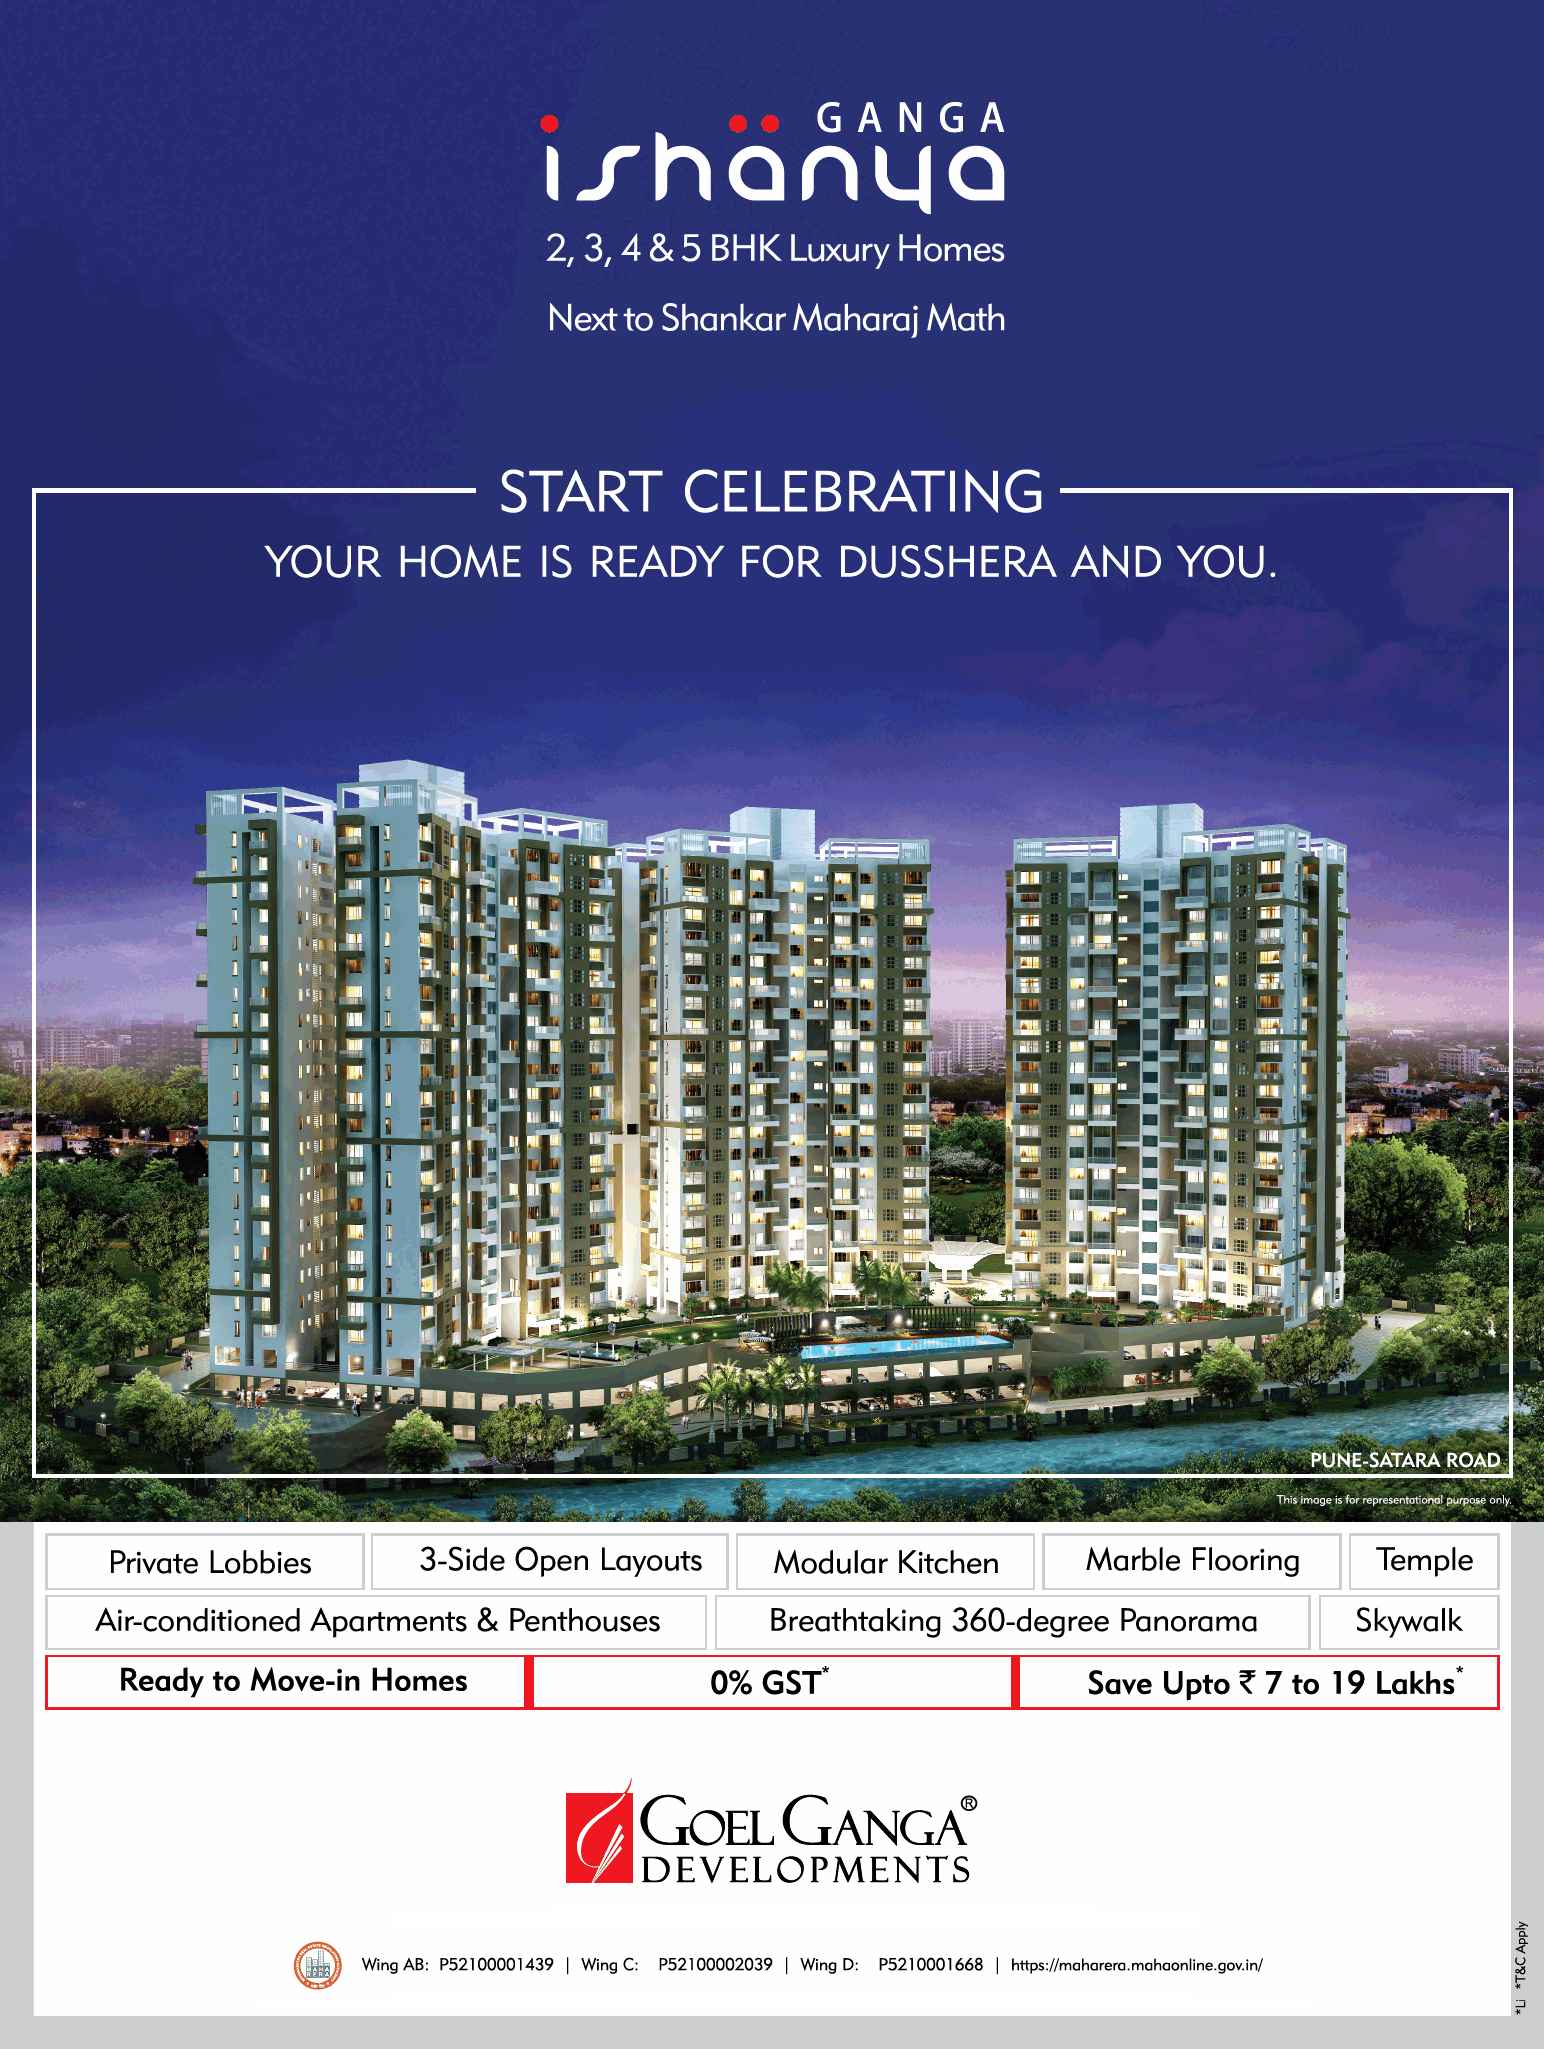 Save up to Rs. 7 to 19 Lakhs by booking home at Ganga Ishanya in Pune